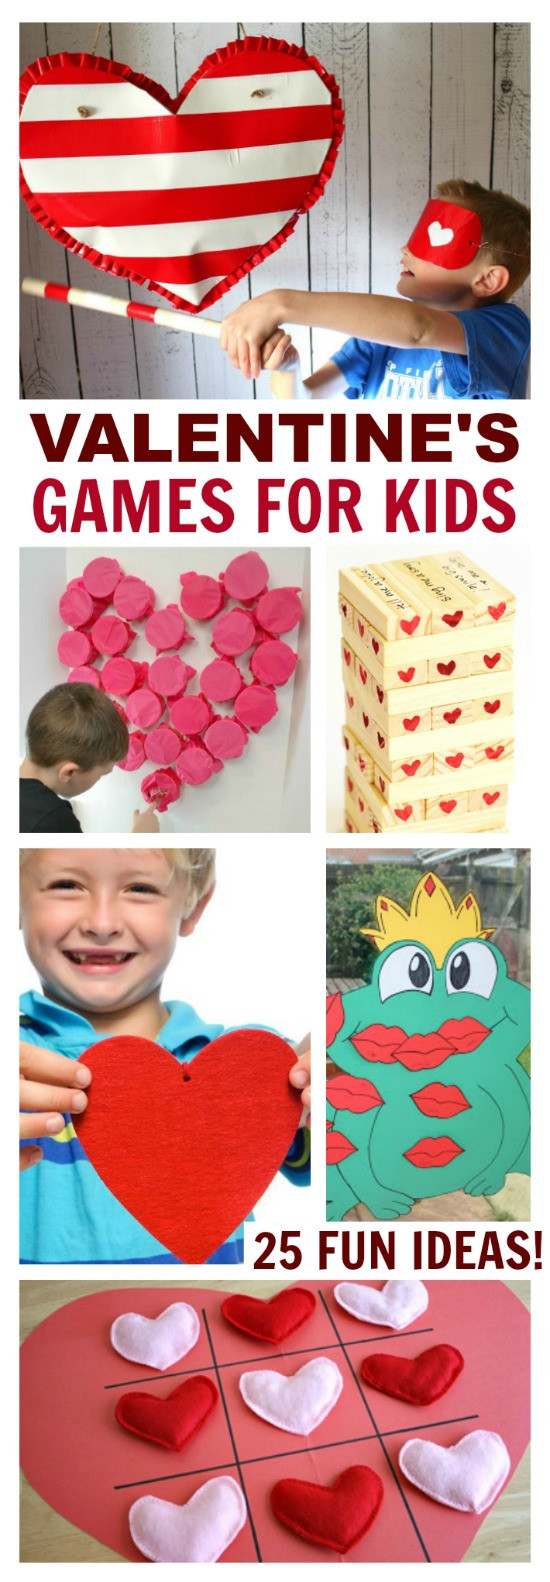 Valentines Day Party Games
 Valentine s Games for Kids